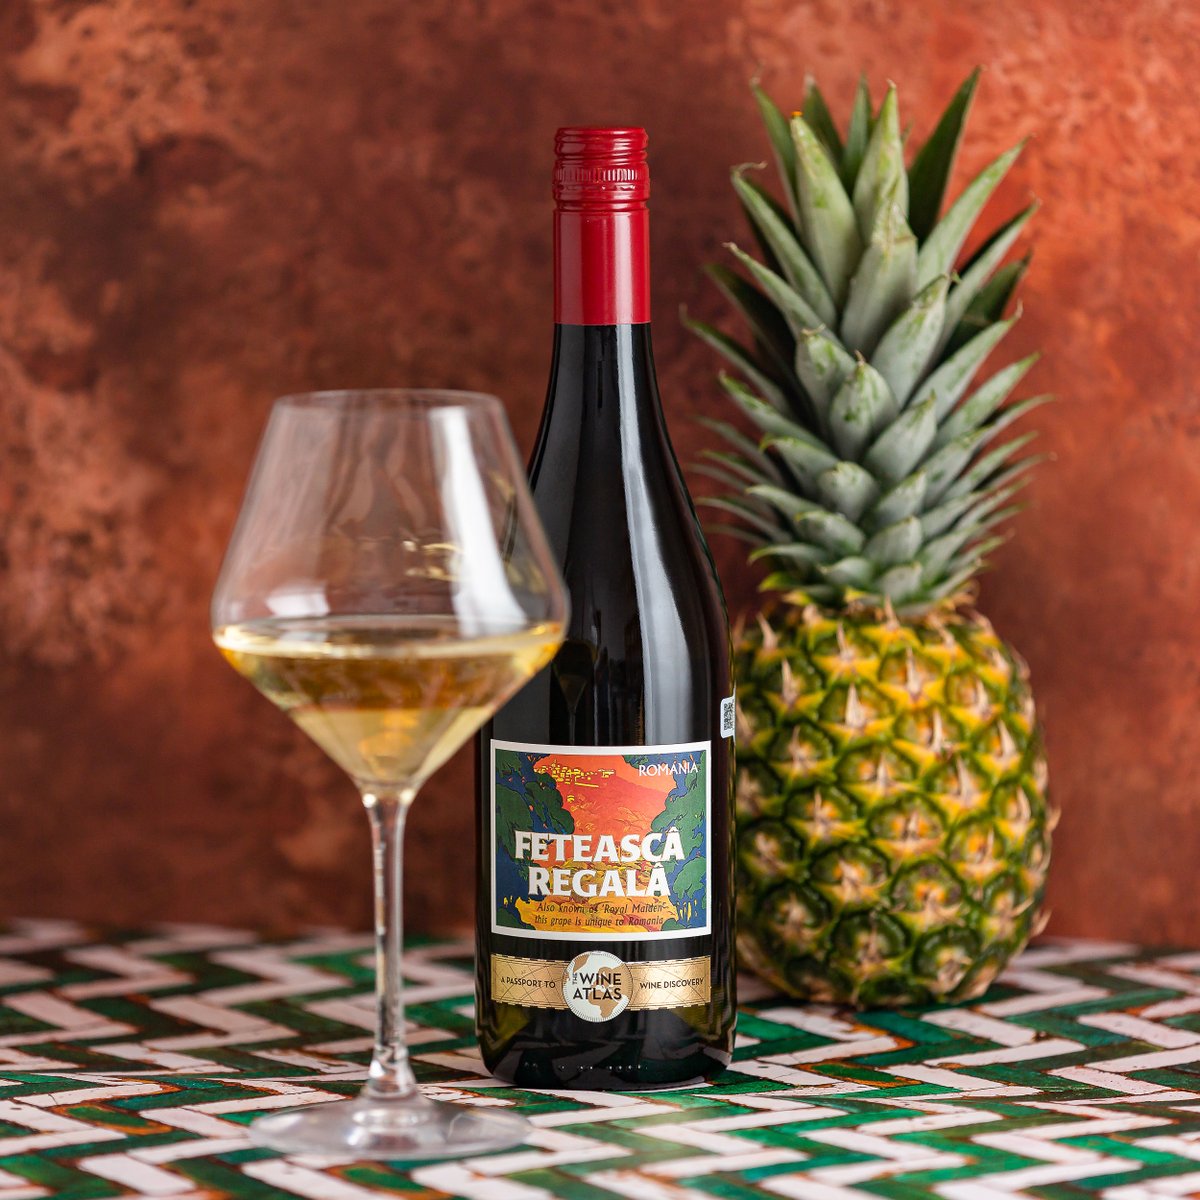 Wine Atlas' Feteasca Regala is the perfect match for rice salads and Asian stir-fries, available in the UK at Asda for £5.25

#weekdaywine #wineatlas #romanianwines #cramelerecas #winediscovery